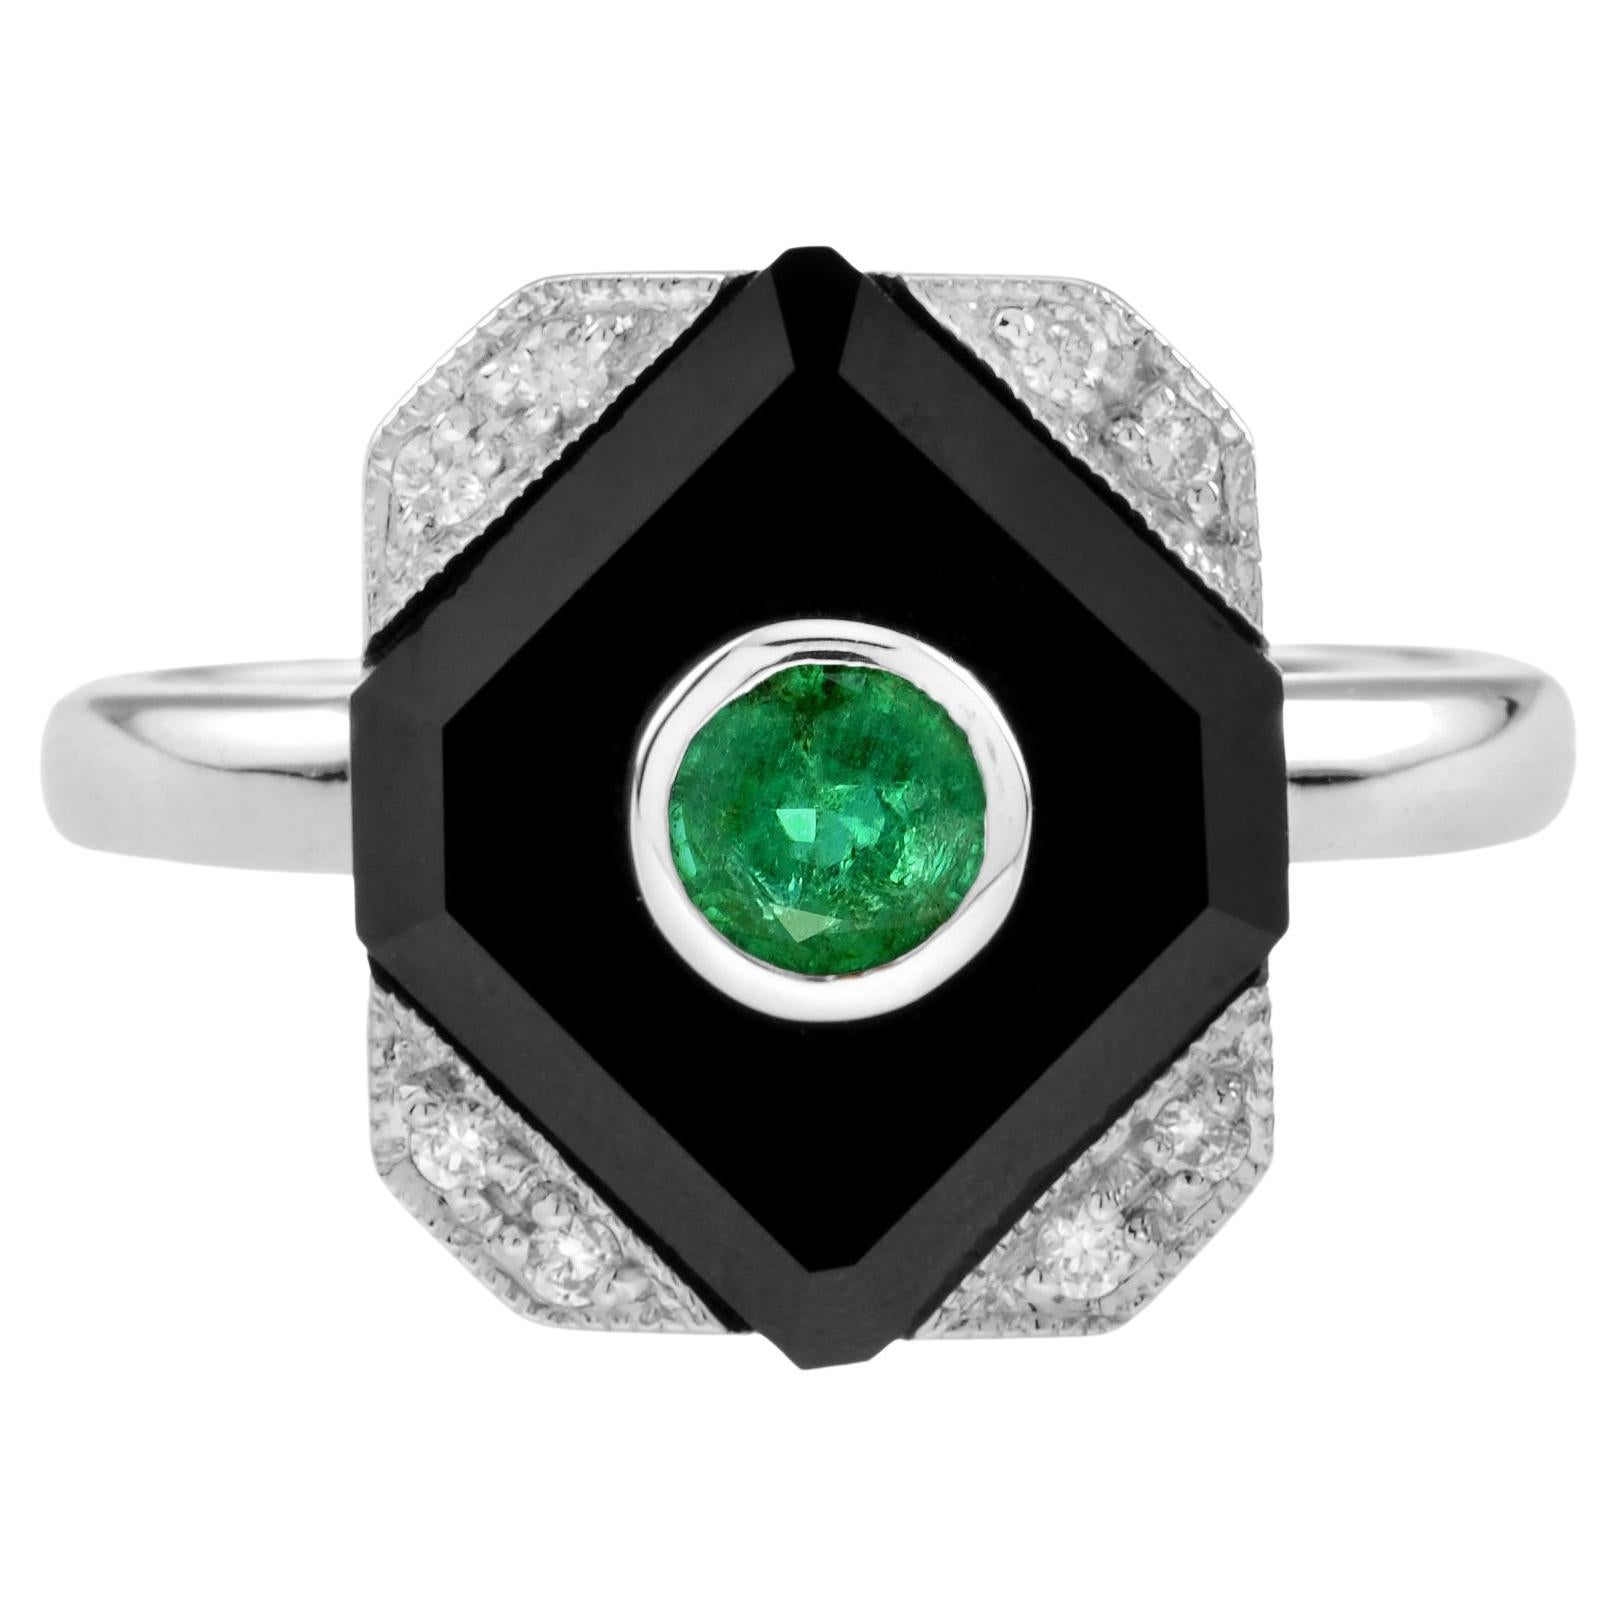 For Sale:  Emerald Onyx Diamond Art Deco Style Square Shape Ring in 14K White Gold